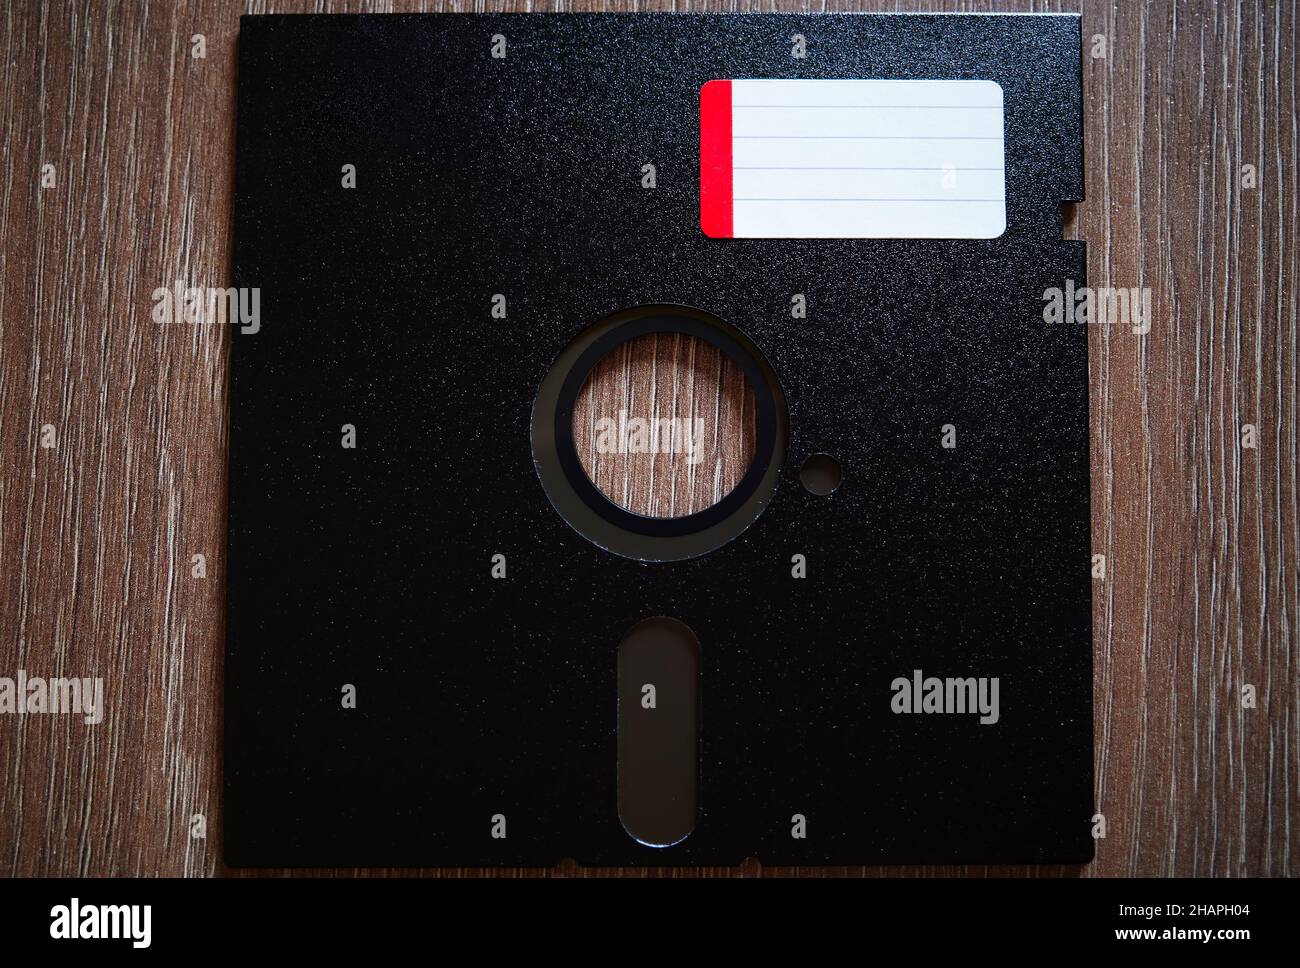 Floppy disc with red label background Stock Photo